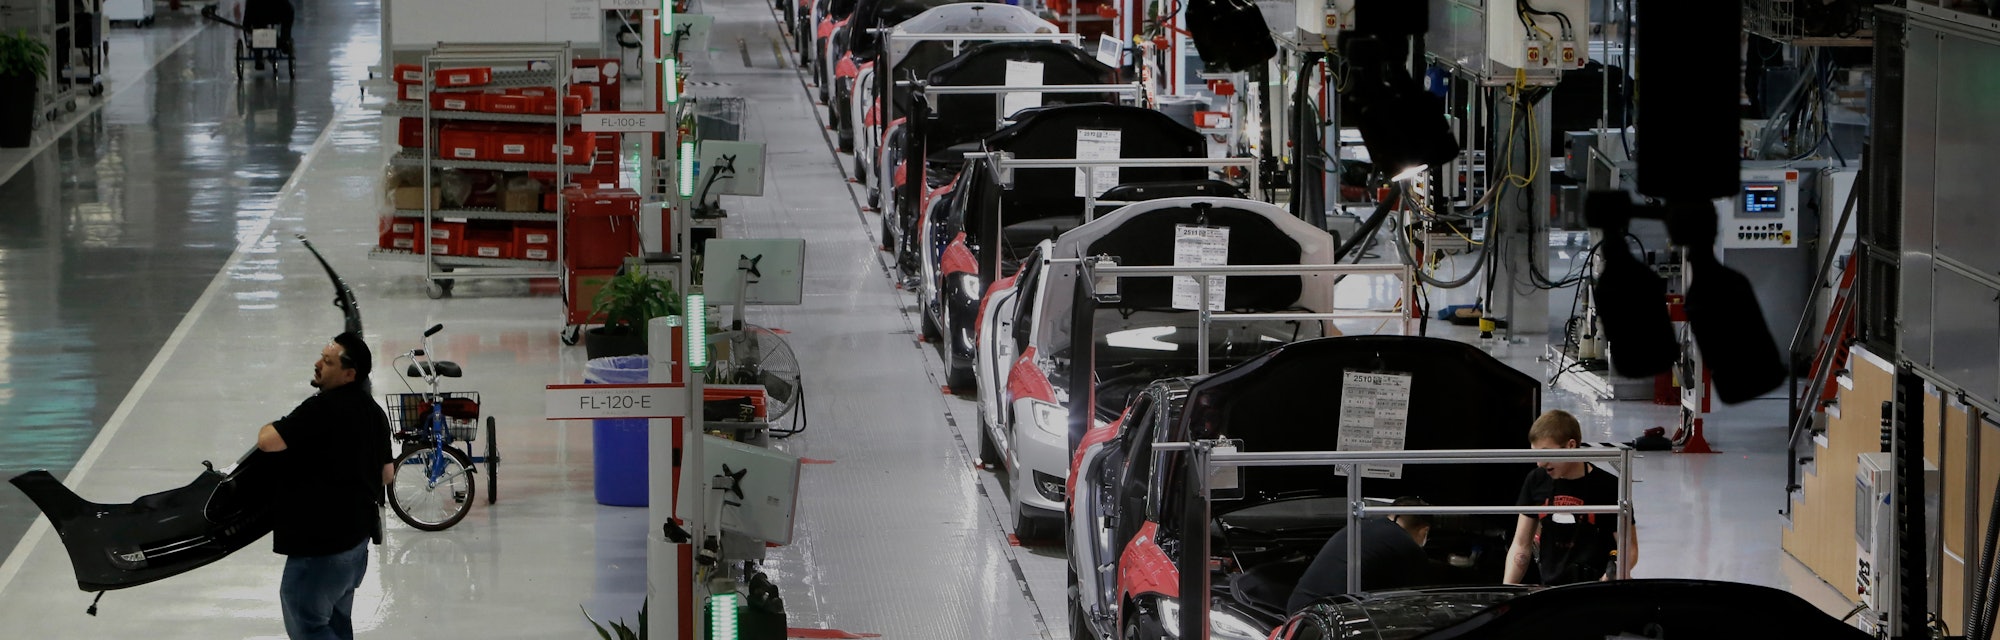 A worker carries a front end part along the assembly at Tesla Motors, California's only full-scale a...